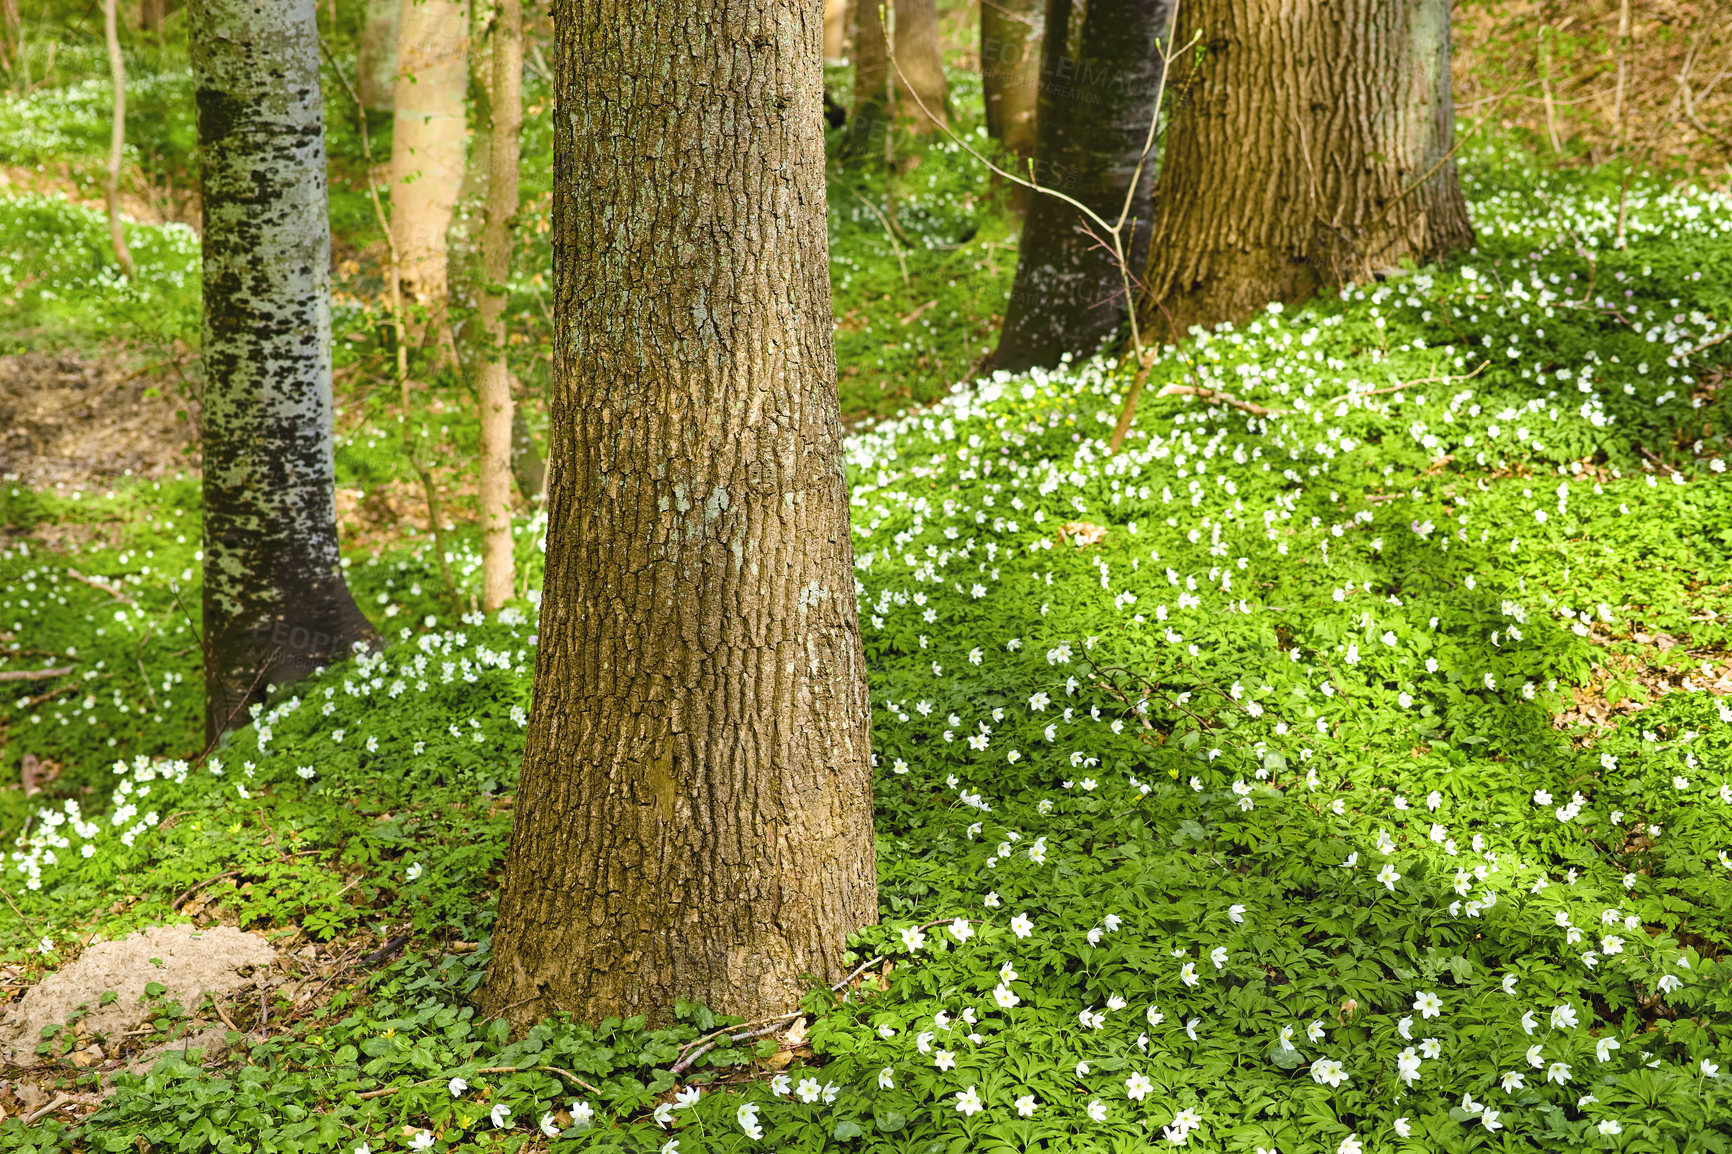 Buy stock photo Blooming wood anemone Anemonoides nemorosa in the forest in early spring.  White flowers and green vegetation growing between the trees on the forest floor. Moss covered tree trunks growing. 